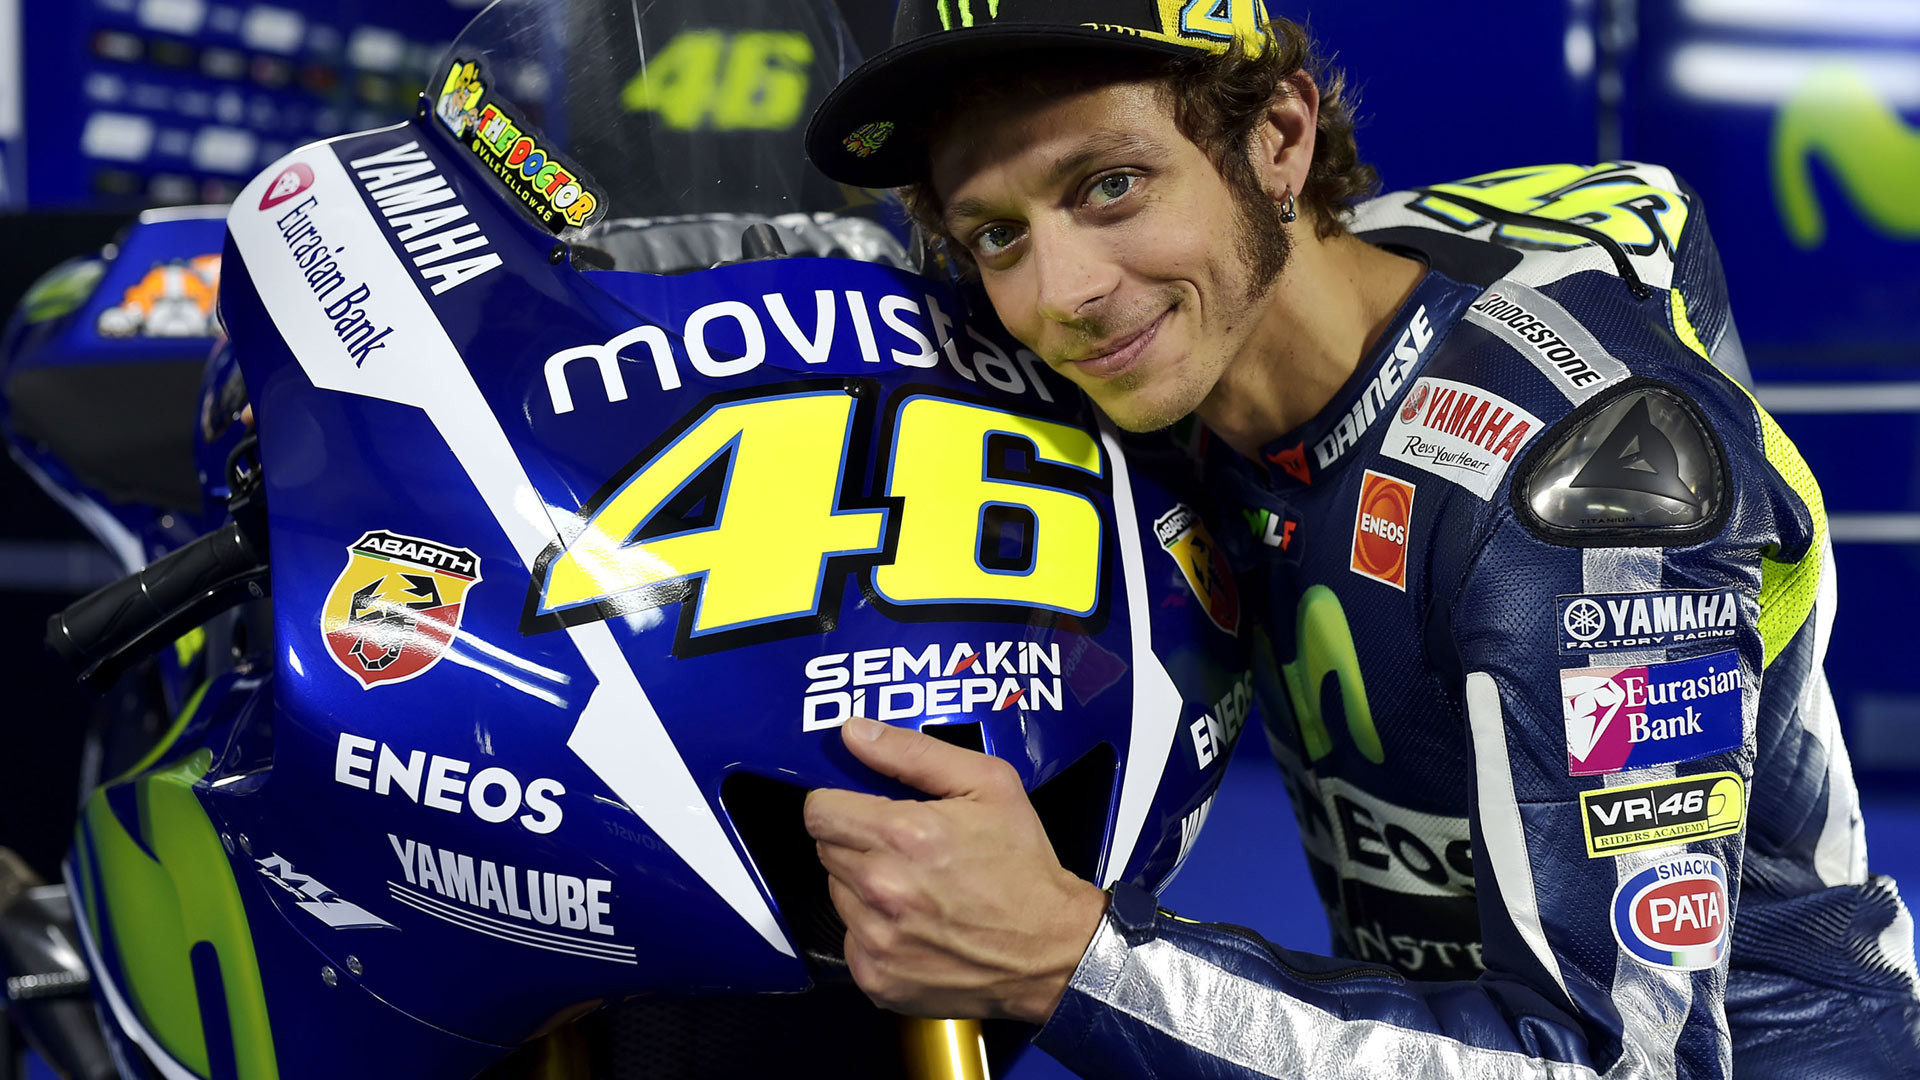 1920x1080 Valentino rossi wallpaper – Free full hd wallpapers for 1080p .